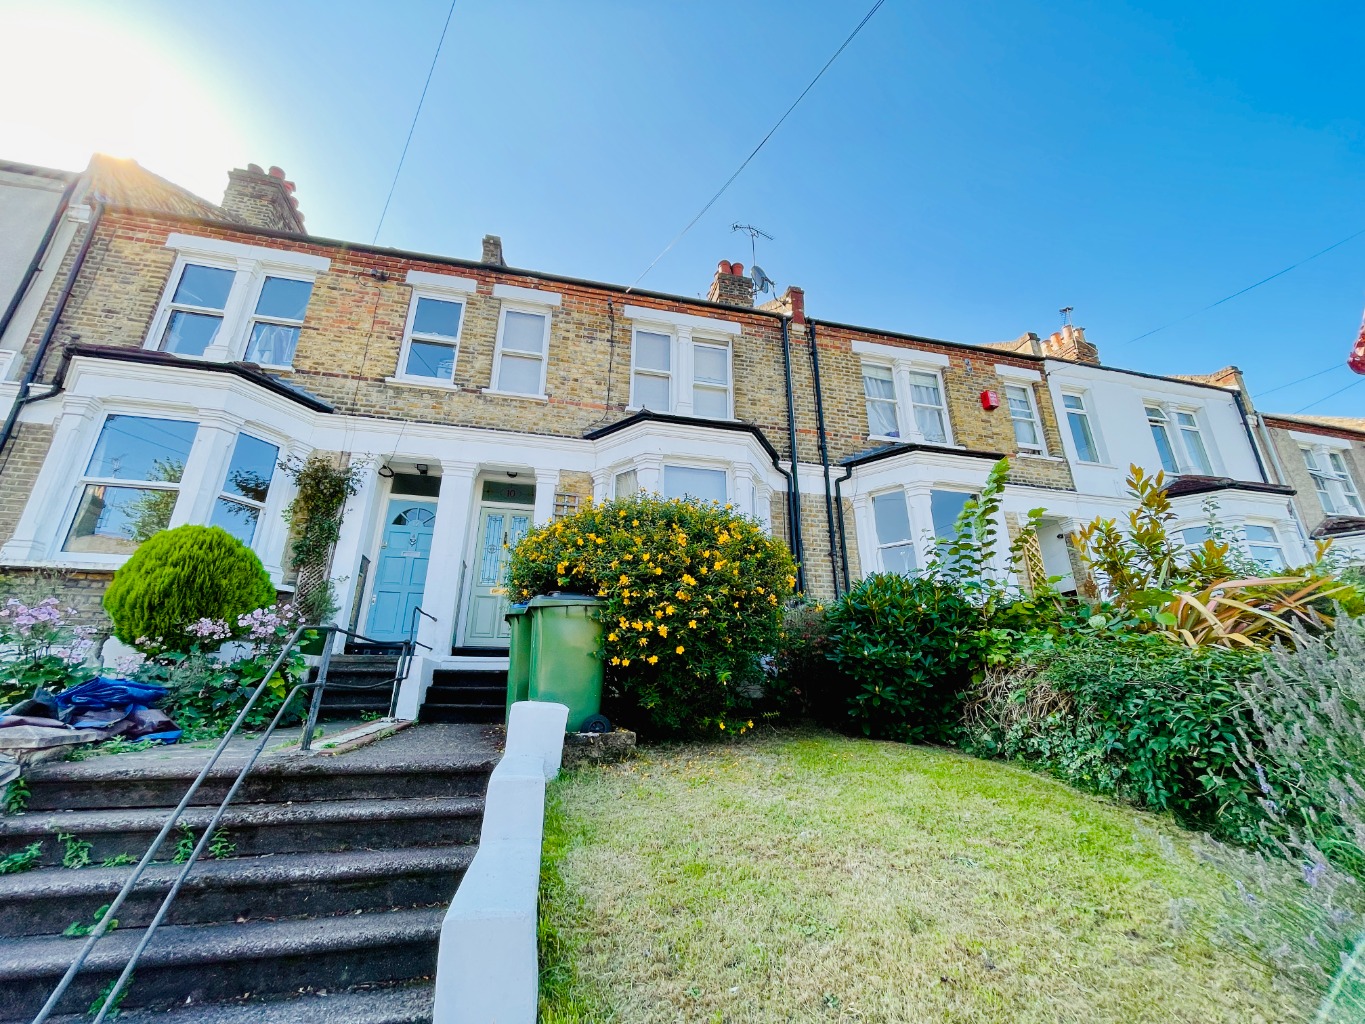 Situated in a very popular and residential road in the  Shooters Hill Slopes and set on an enviable elevated position.